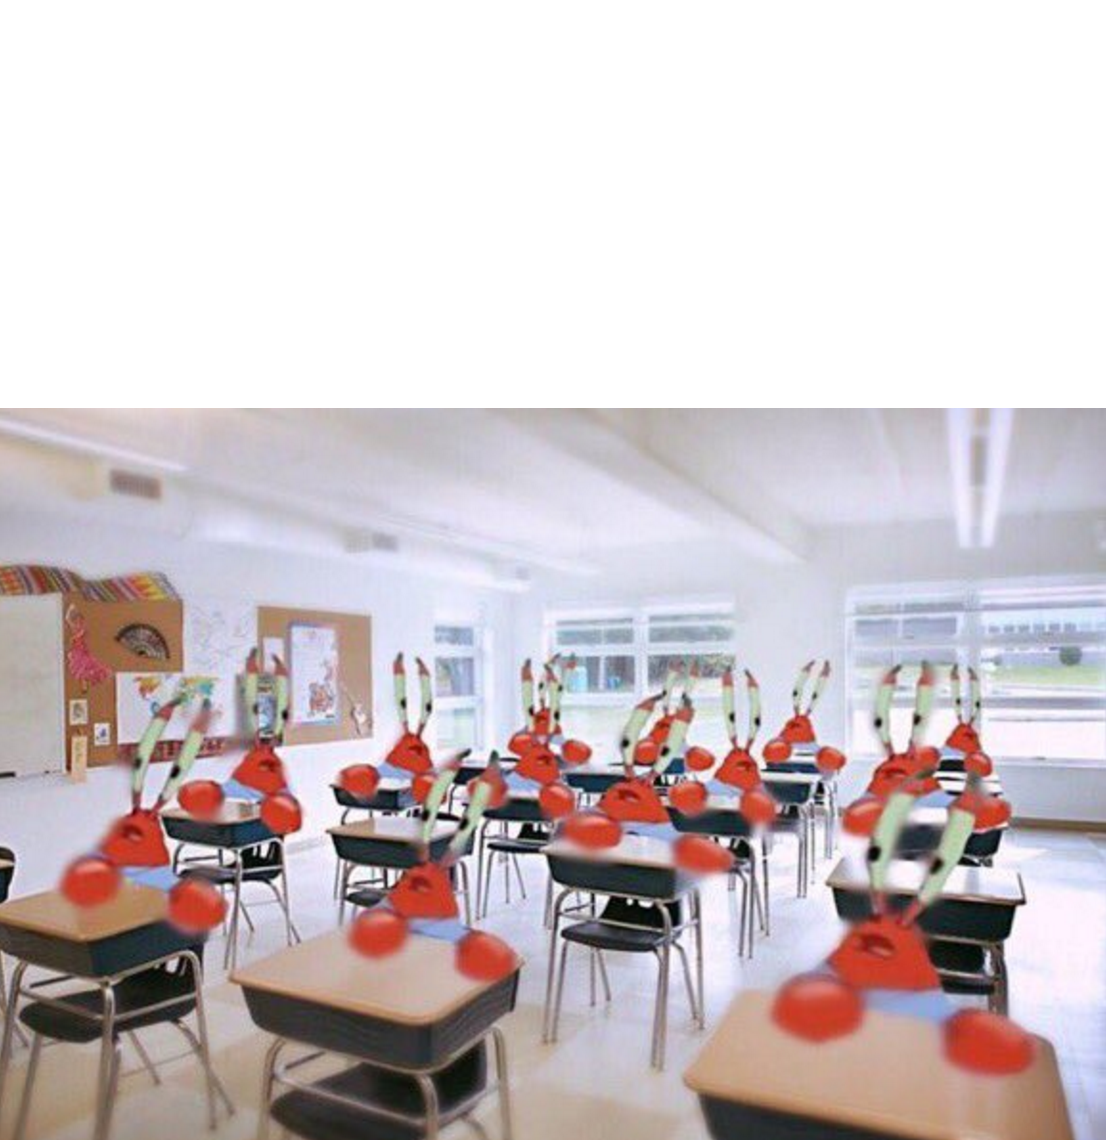 High Quality Mr. Krabs Confused Classroom Blank Meme Template